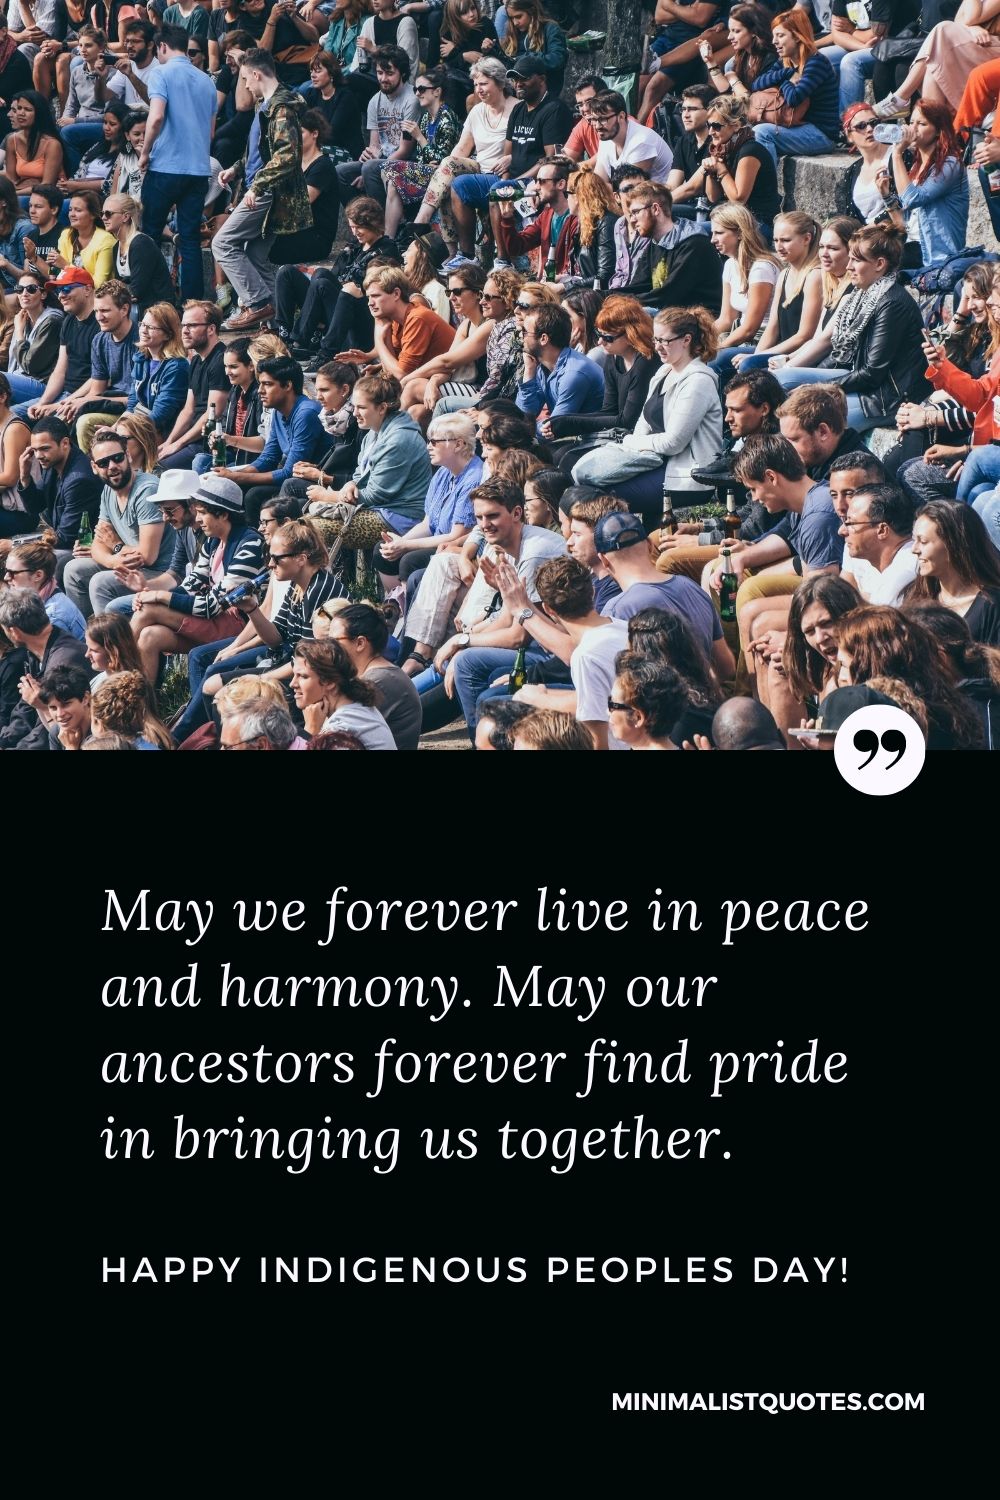 Indigenous Peoples Day Quote, Wish & Message With Image: May we forever live in peace and harmony. May our ancestors forever find pride in bringing us together. Happy Indigenous Peoples Day!